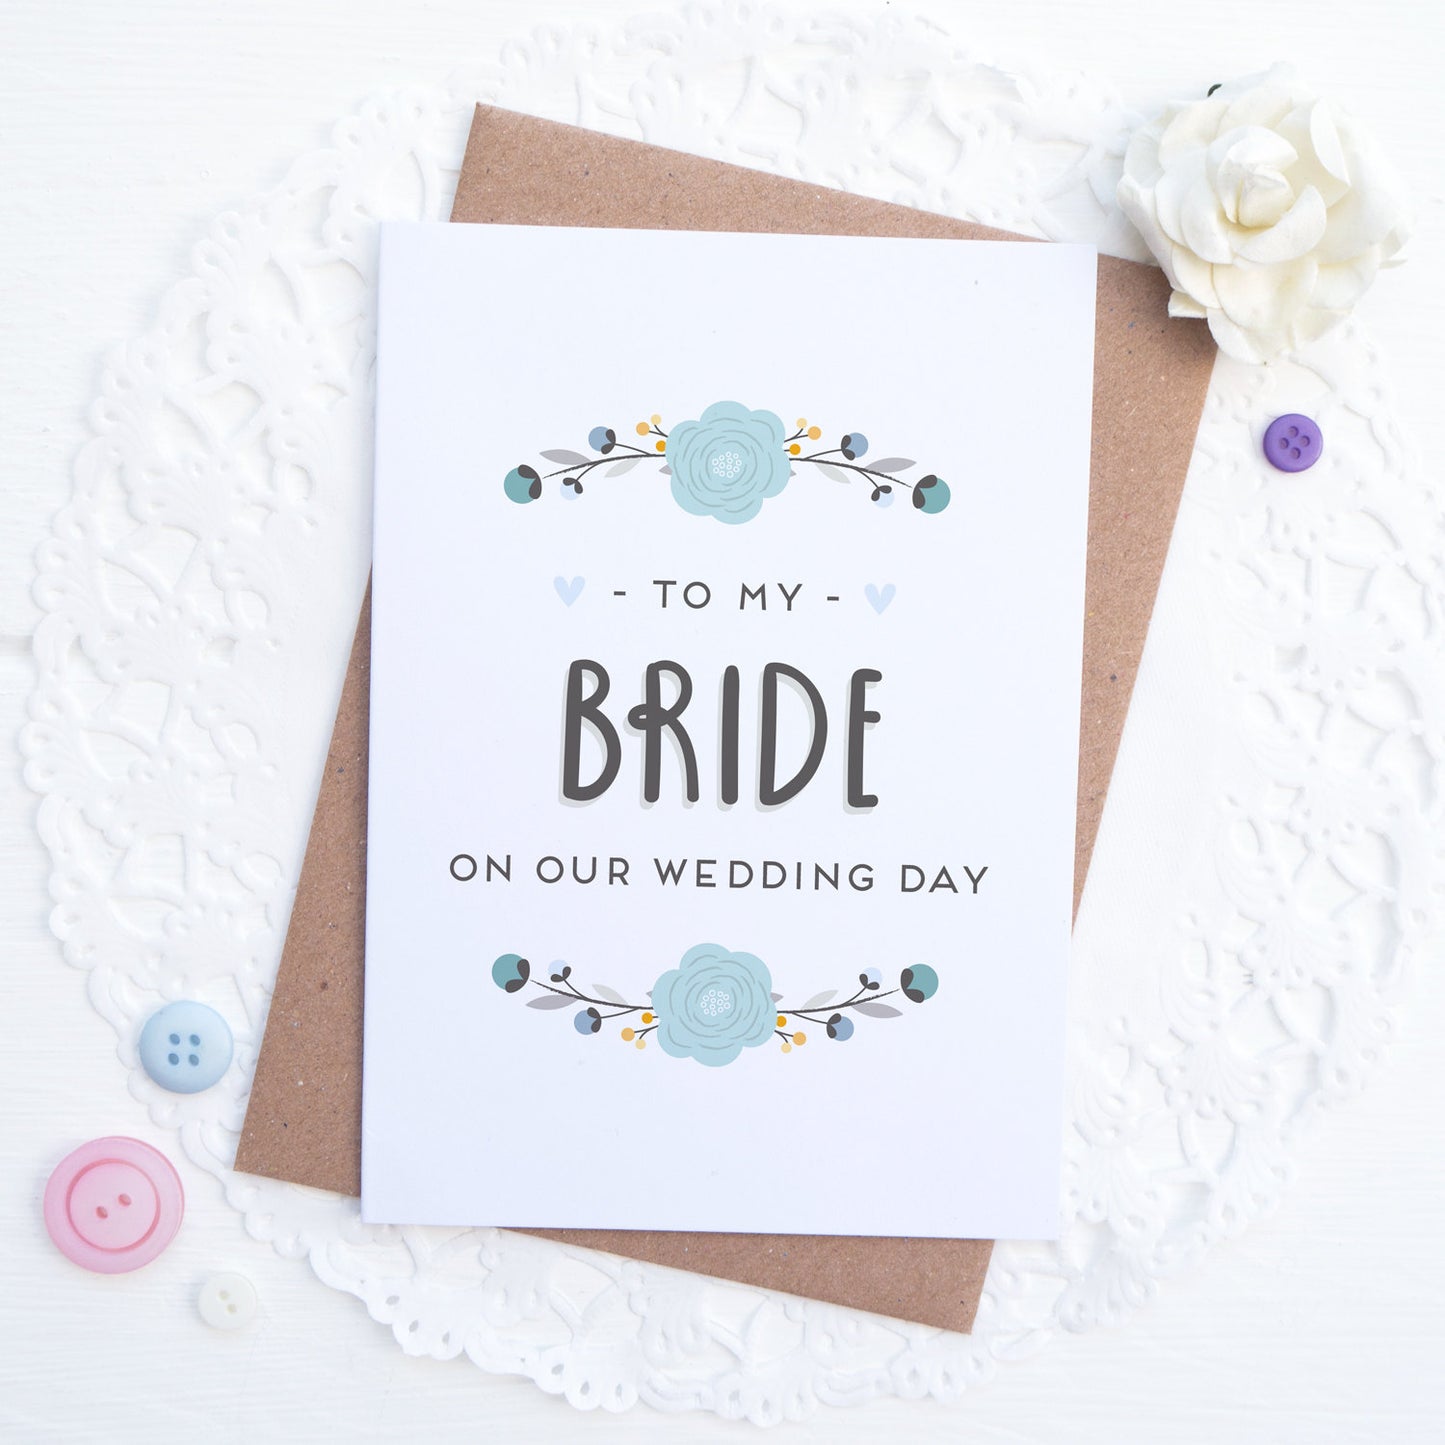 To my bride on our wedding day card in blue